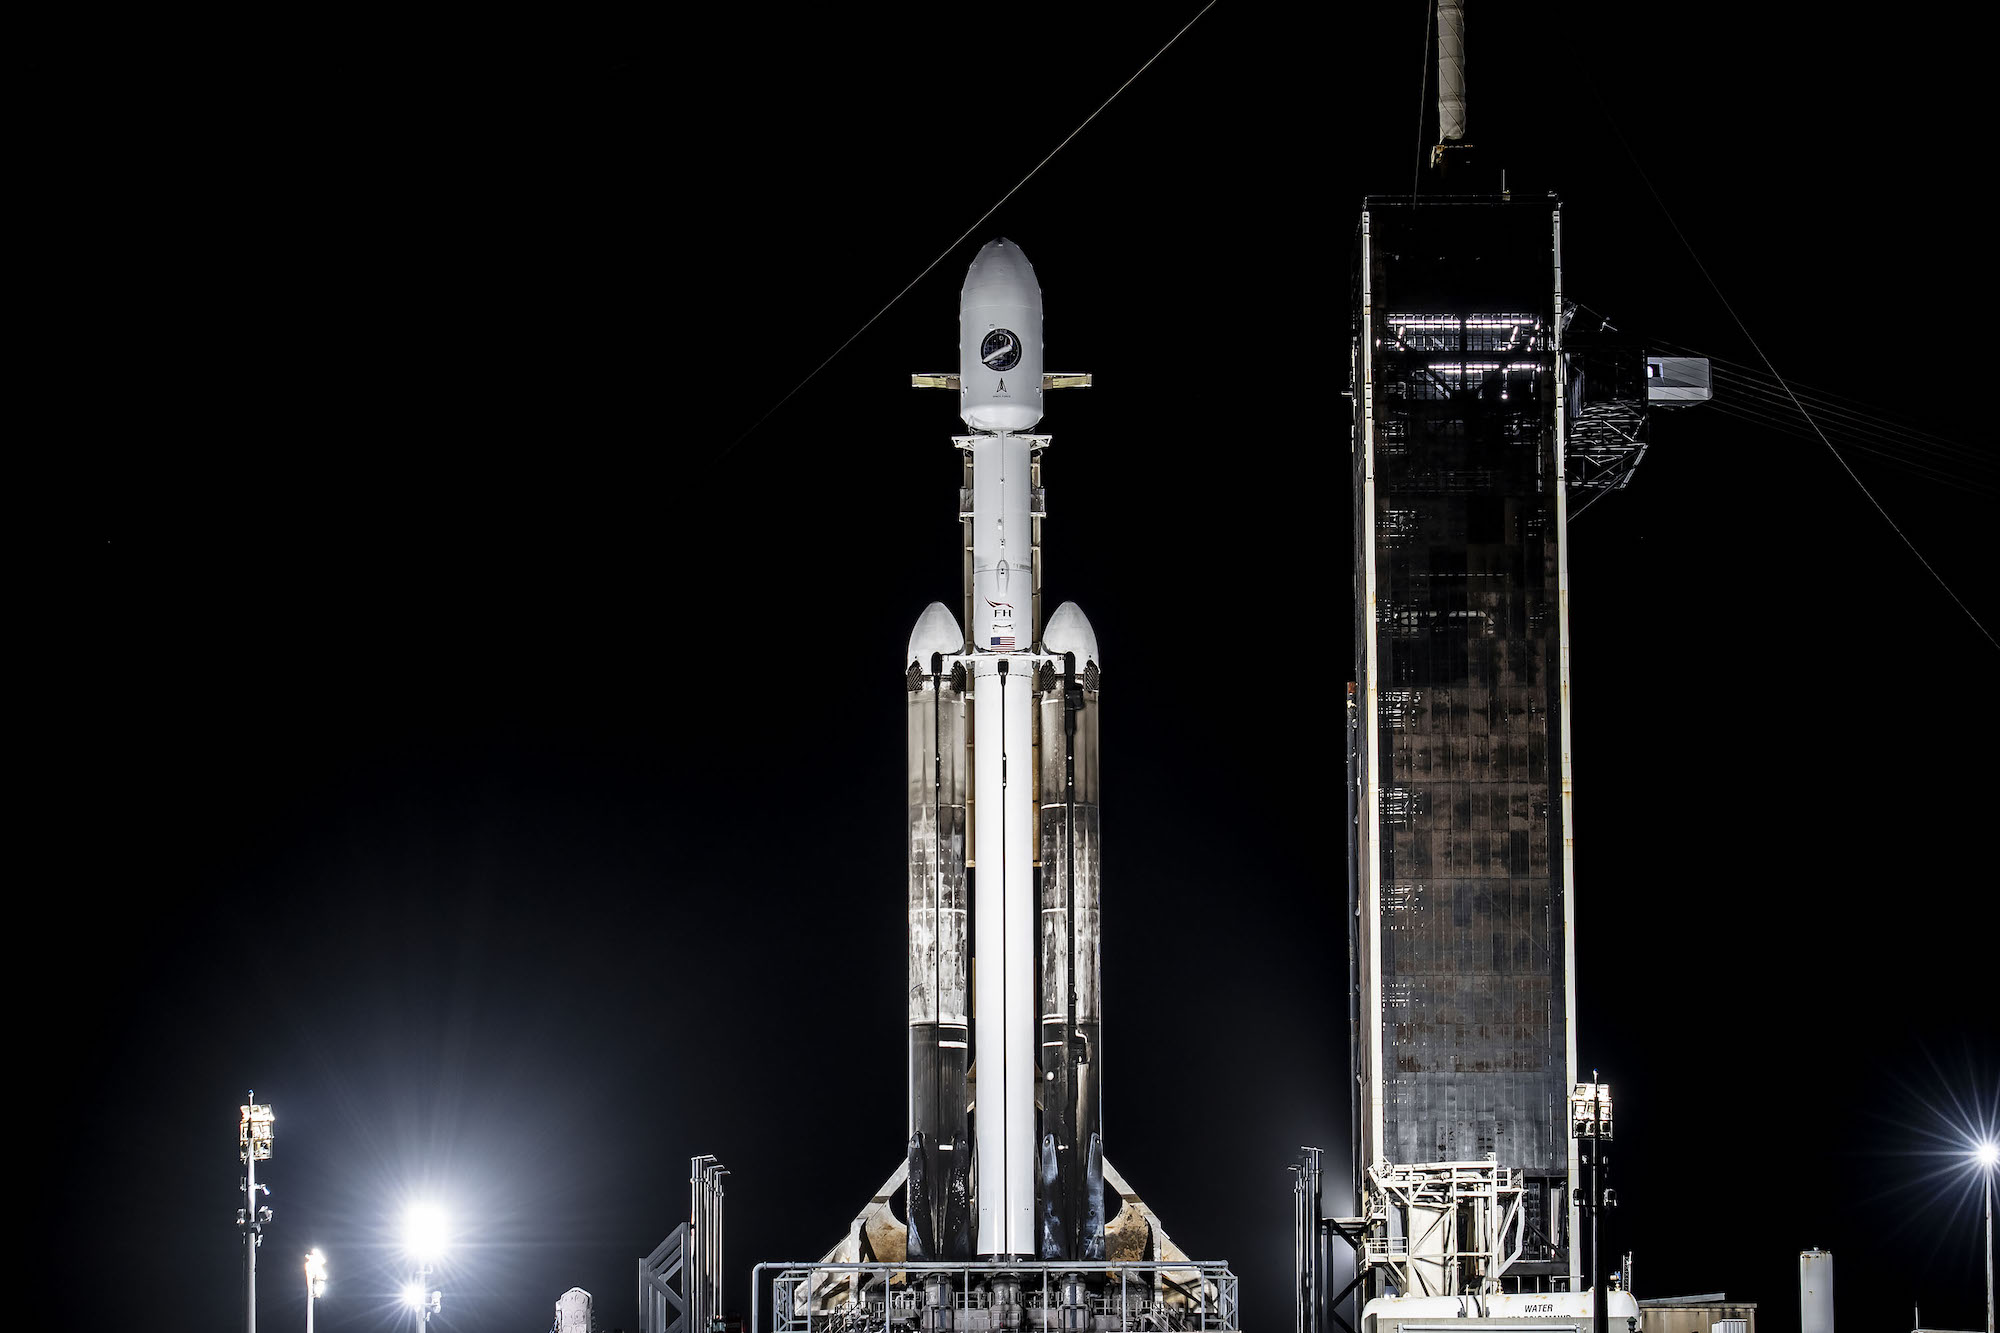 The Falcon Heavy rocket on the launchpad at the Kennedy Space Center in Florida.